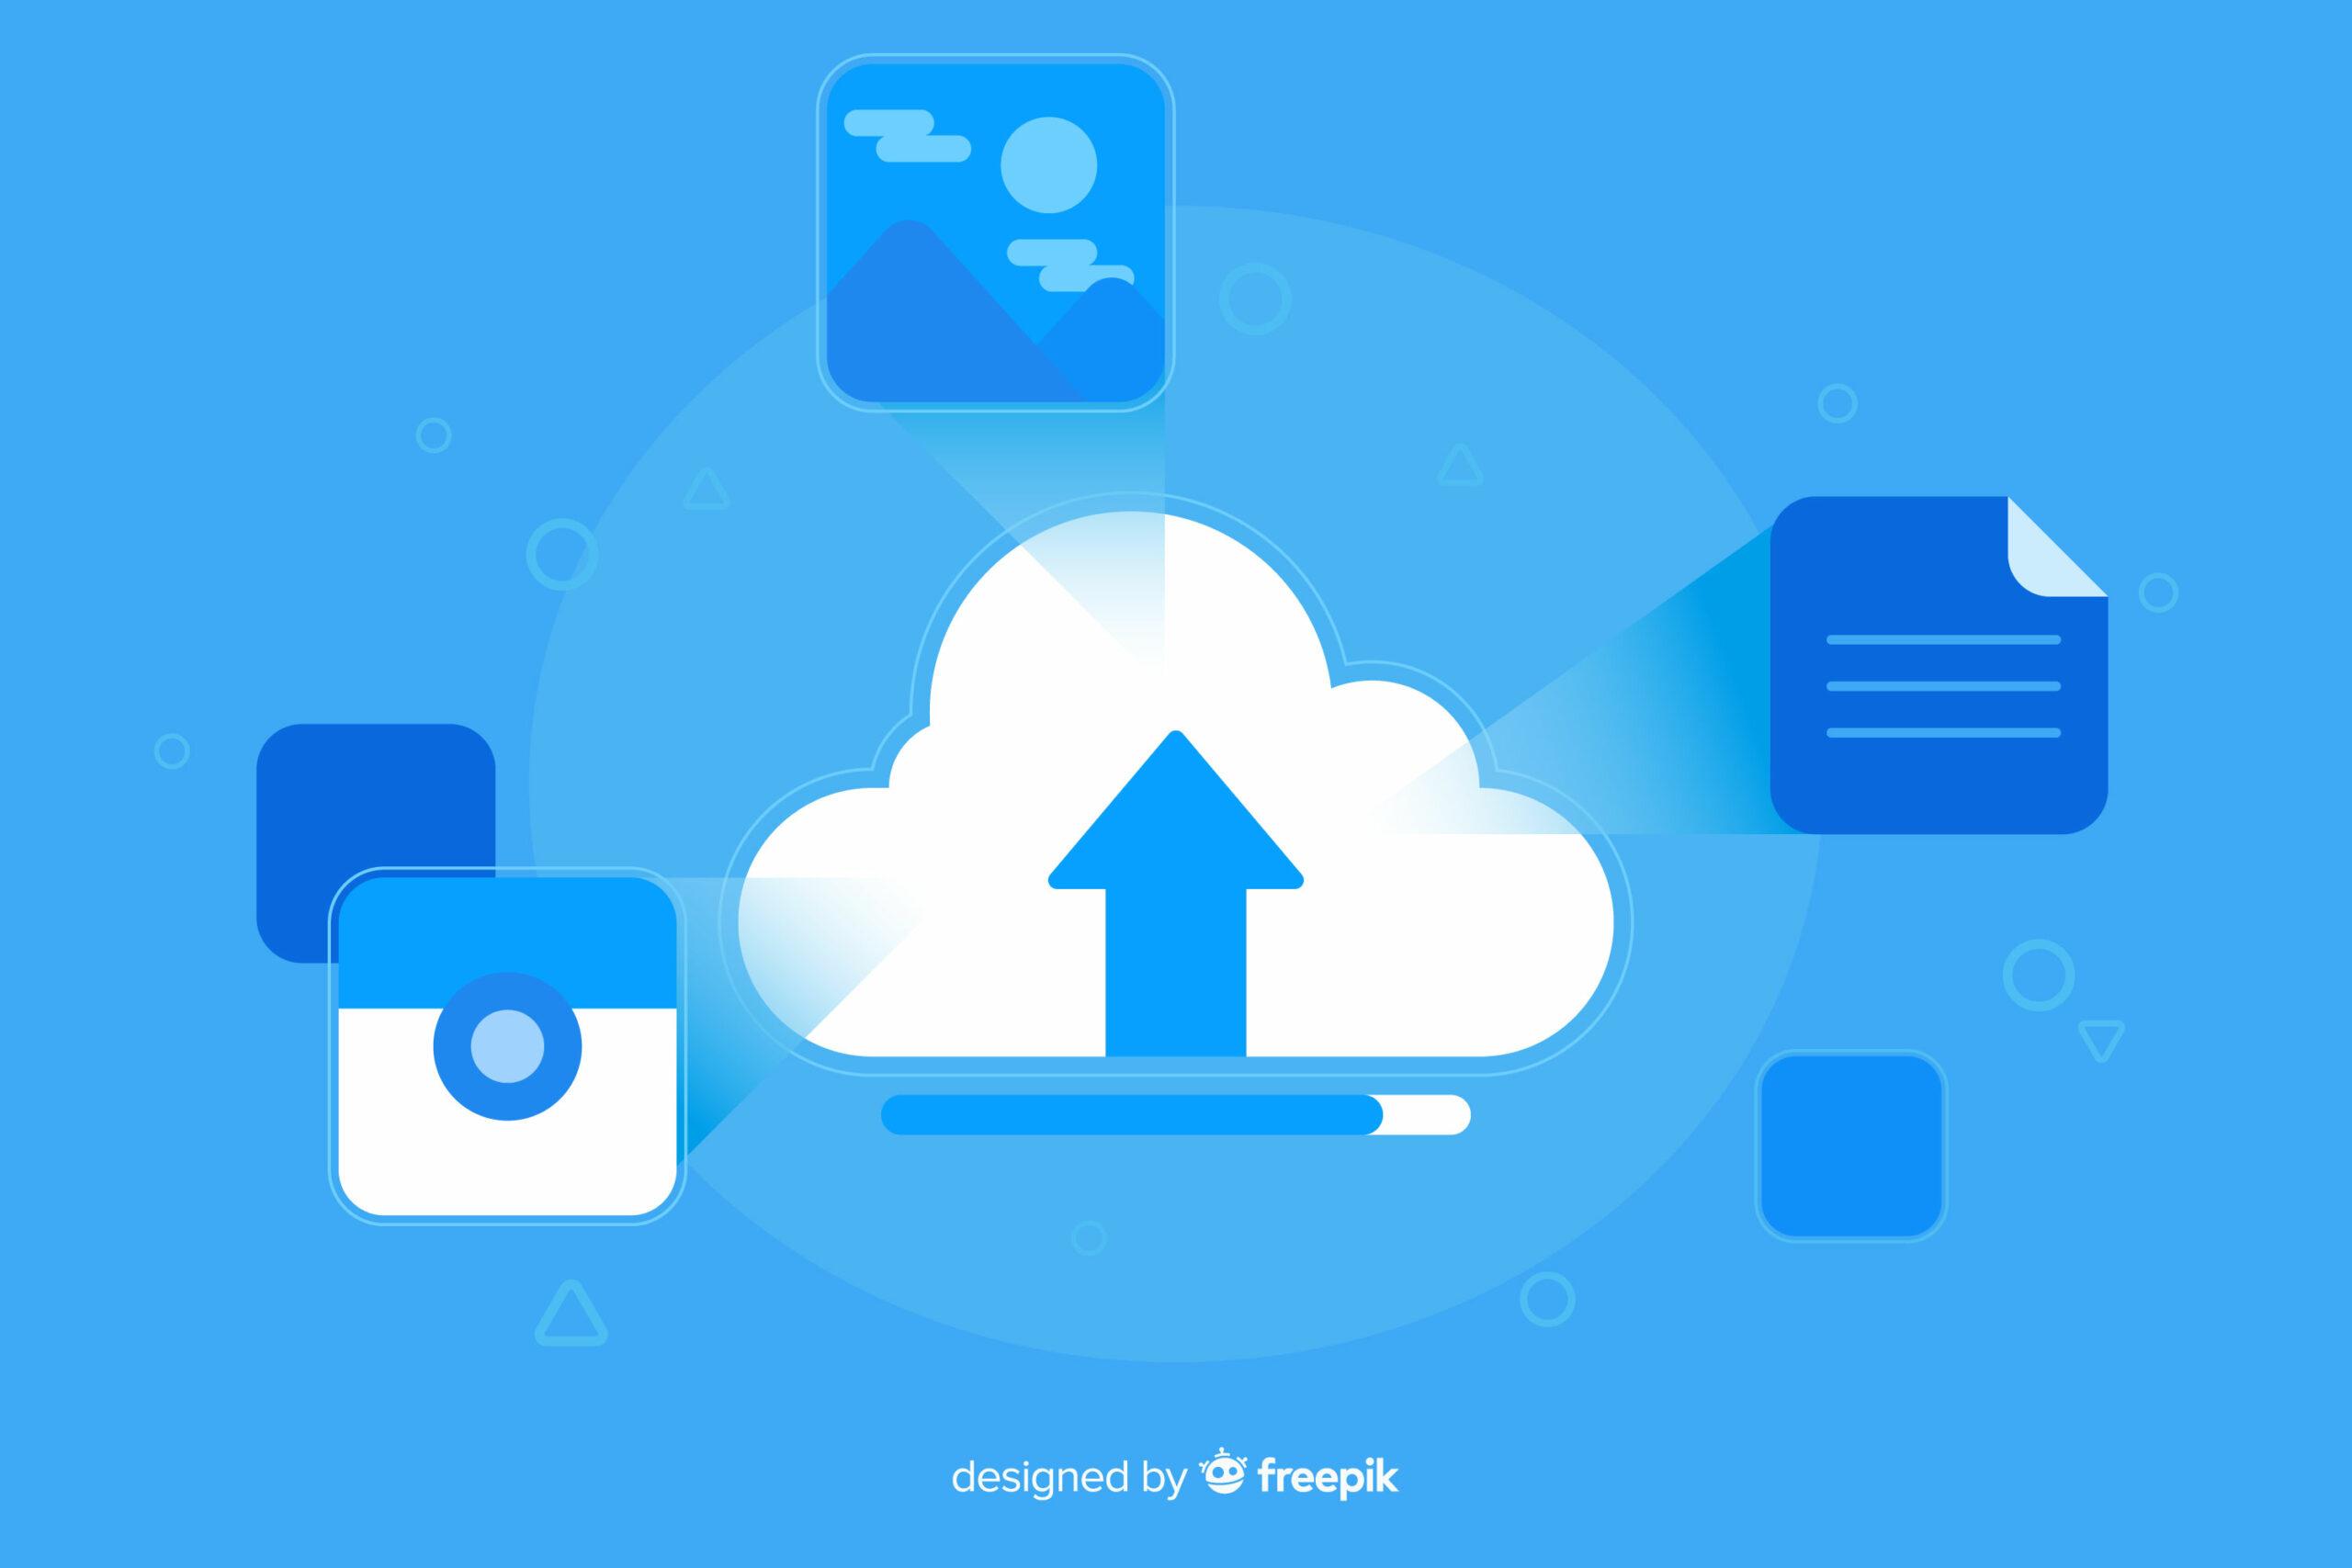 #Why Your Business Needs a Google Cloud Consultant